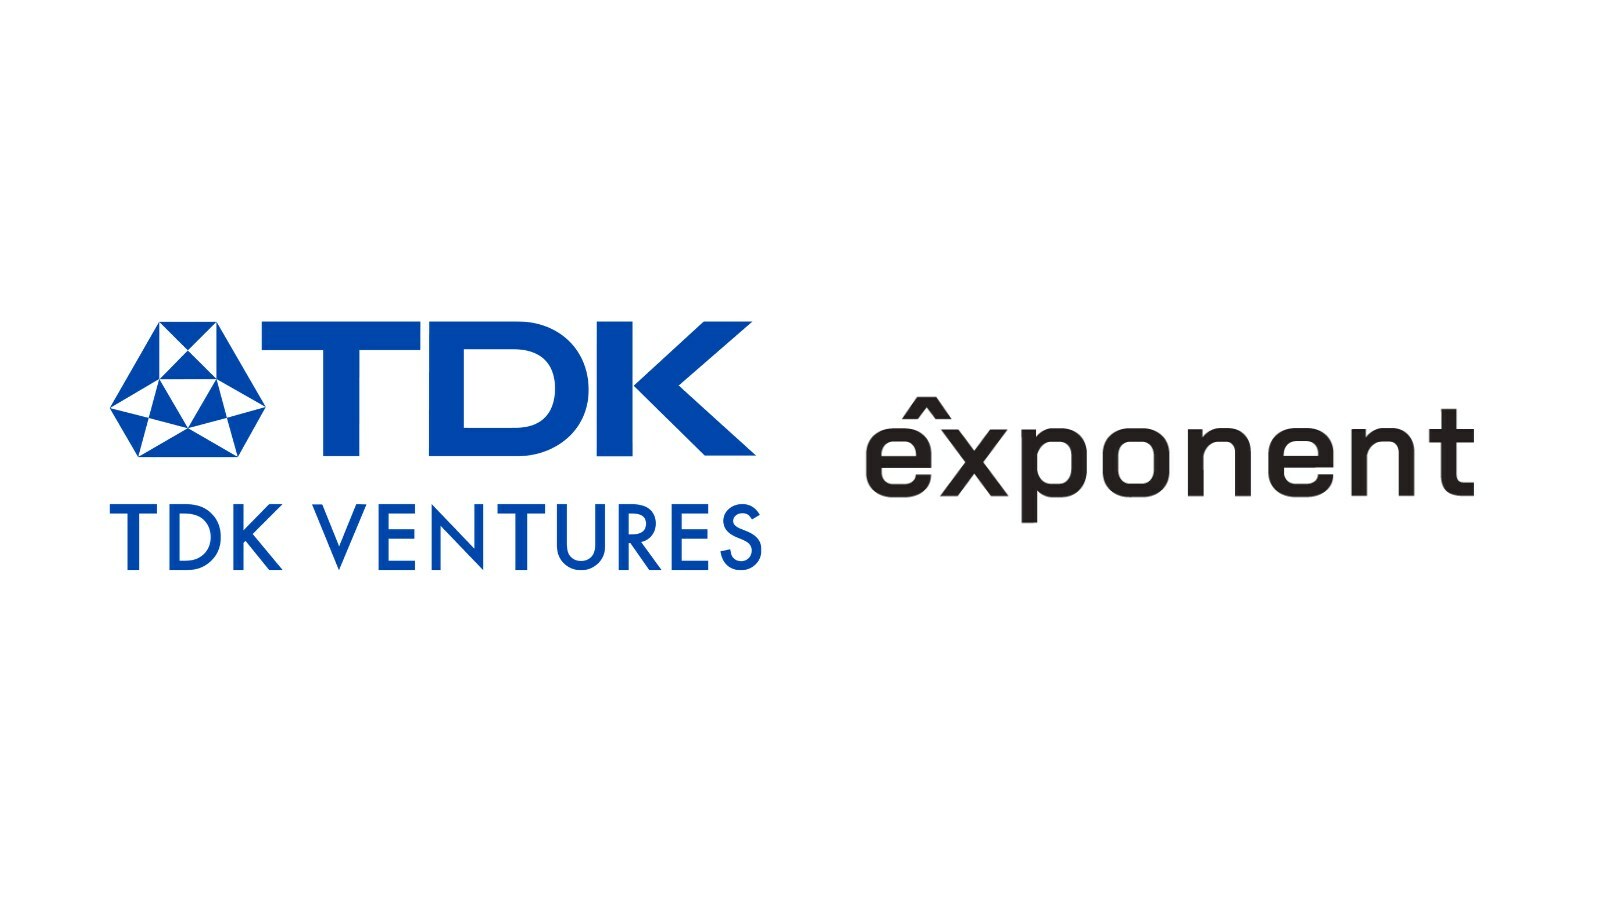 TDK Ventures invests in 15-minute EV charging startup Exponent Energy